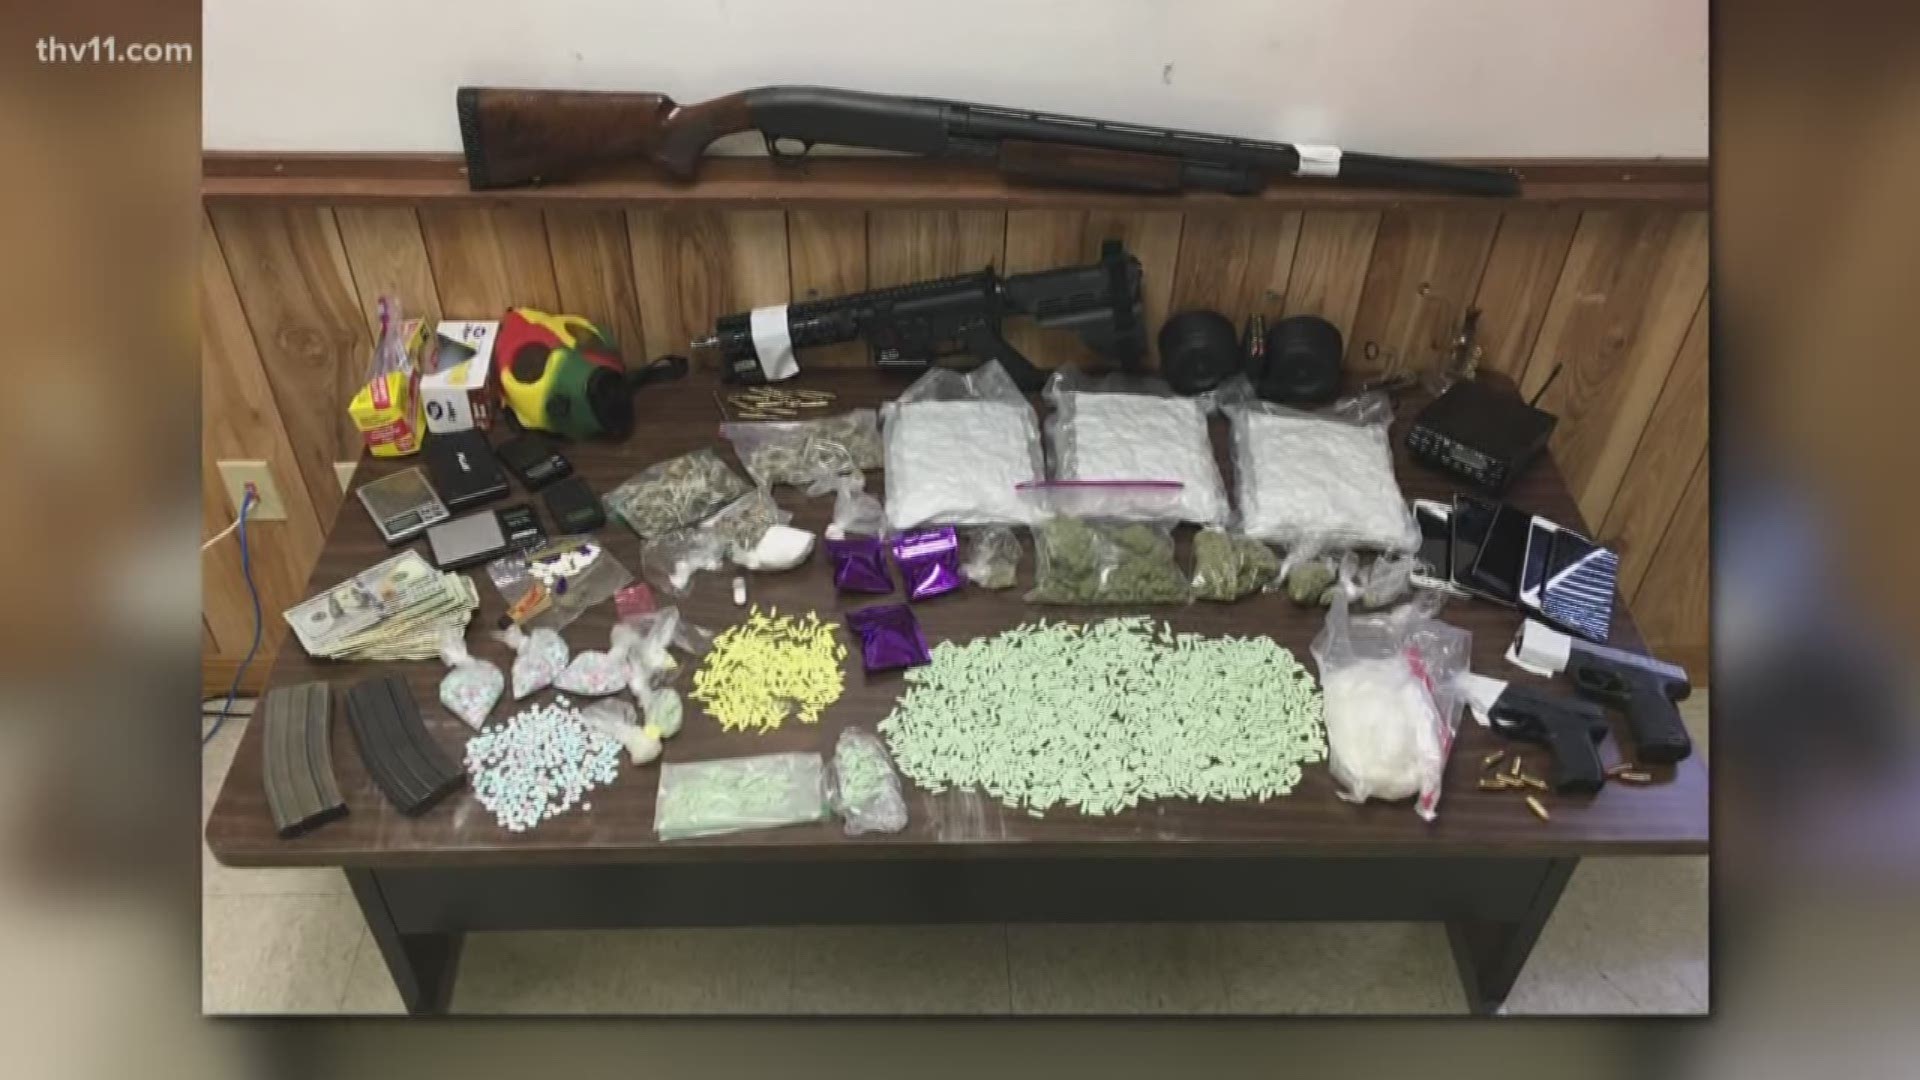 Officers seize over $130K worth of drugs in Searcy